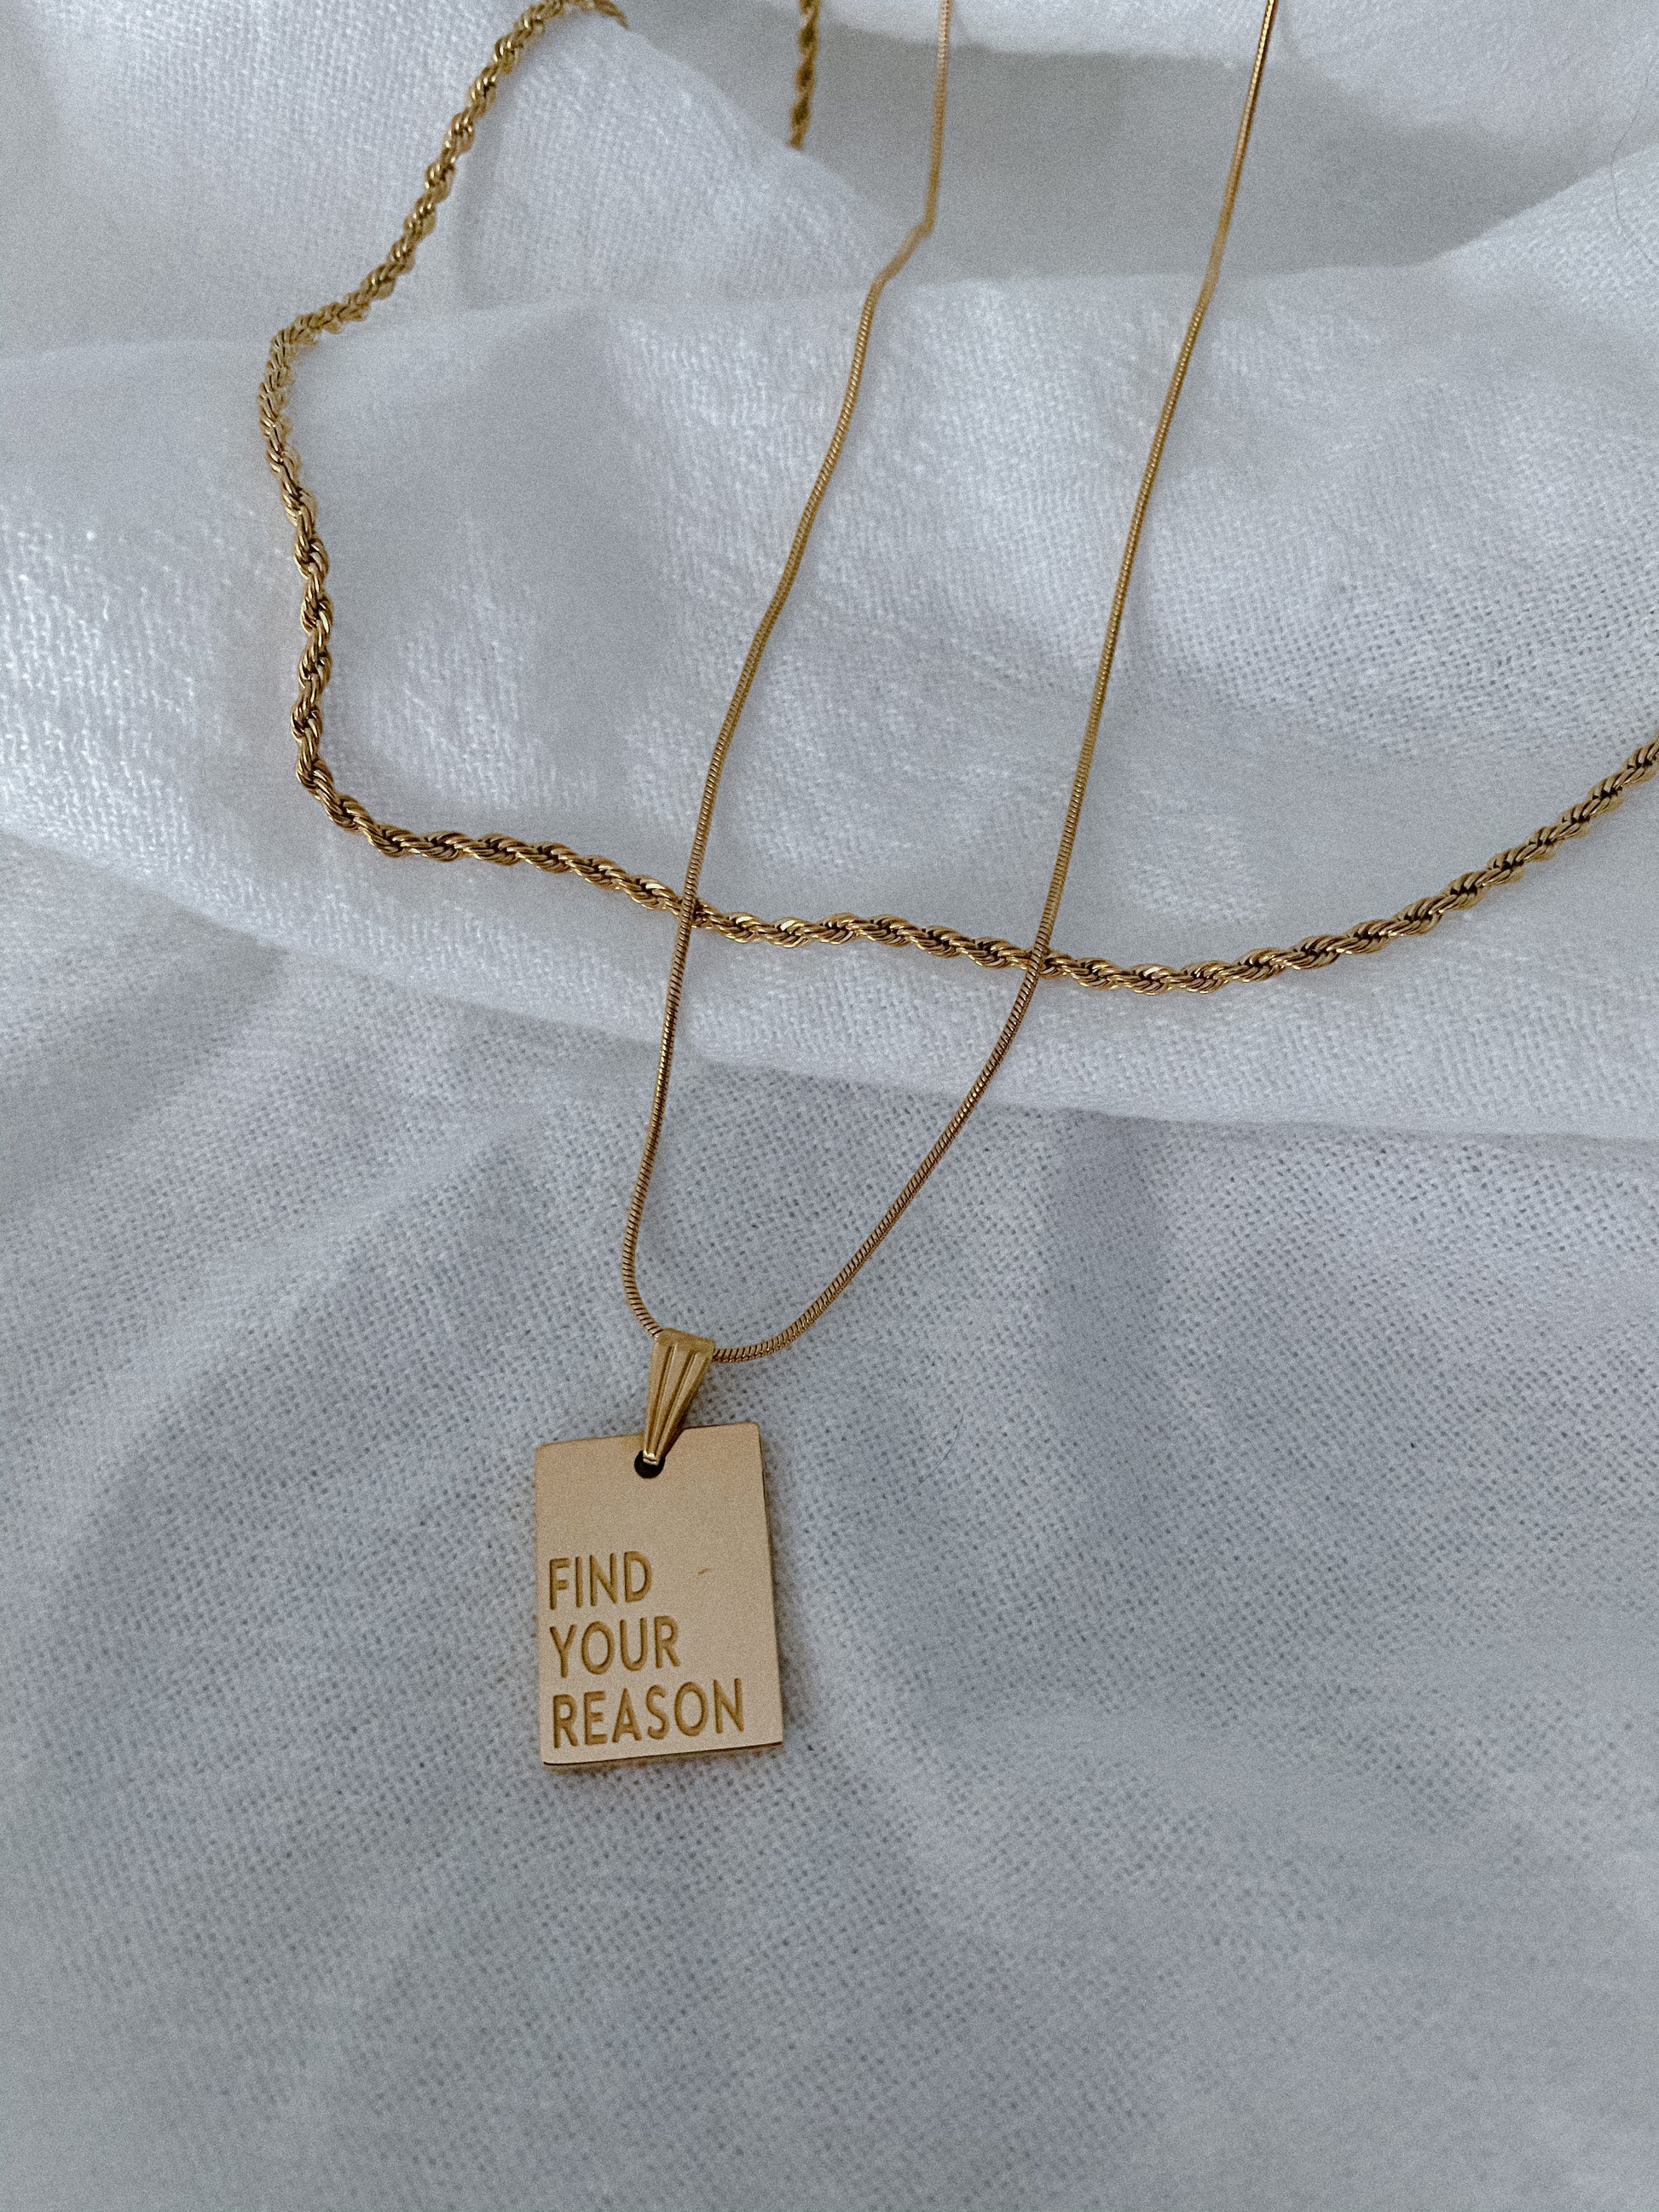 FIND YOUR REASON - both necklaces combined + gift box - Mae Cargo